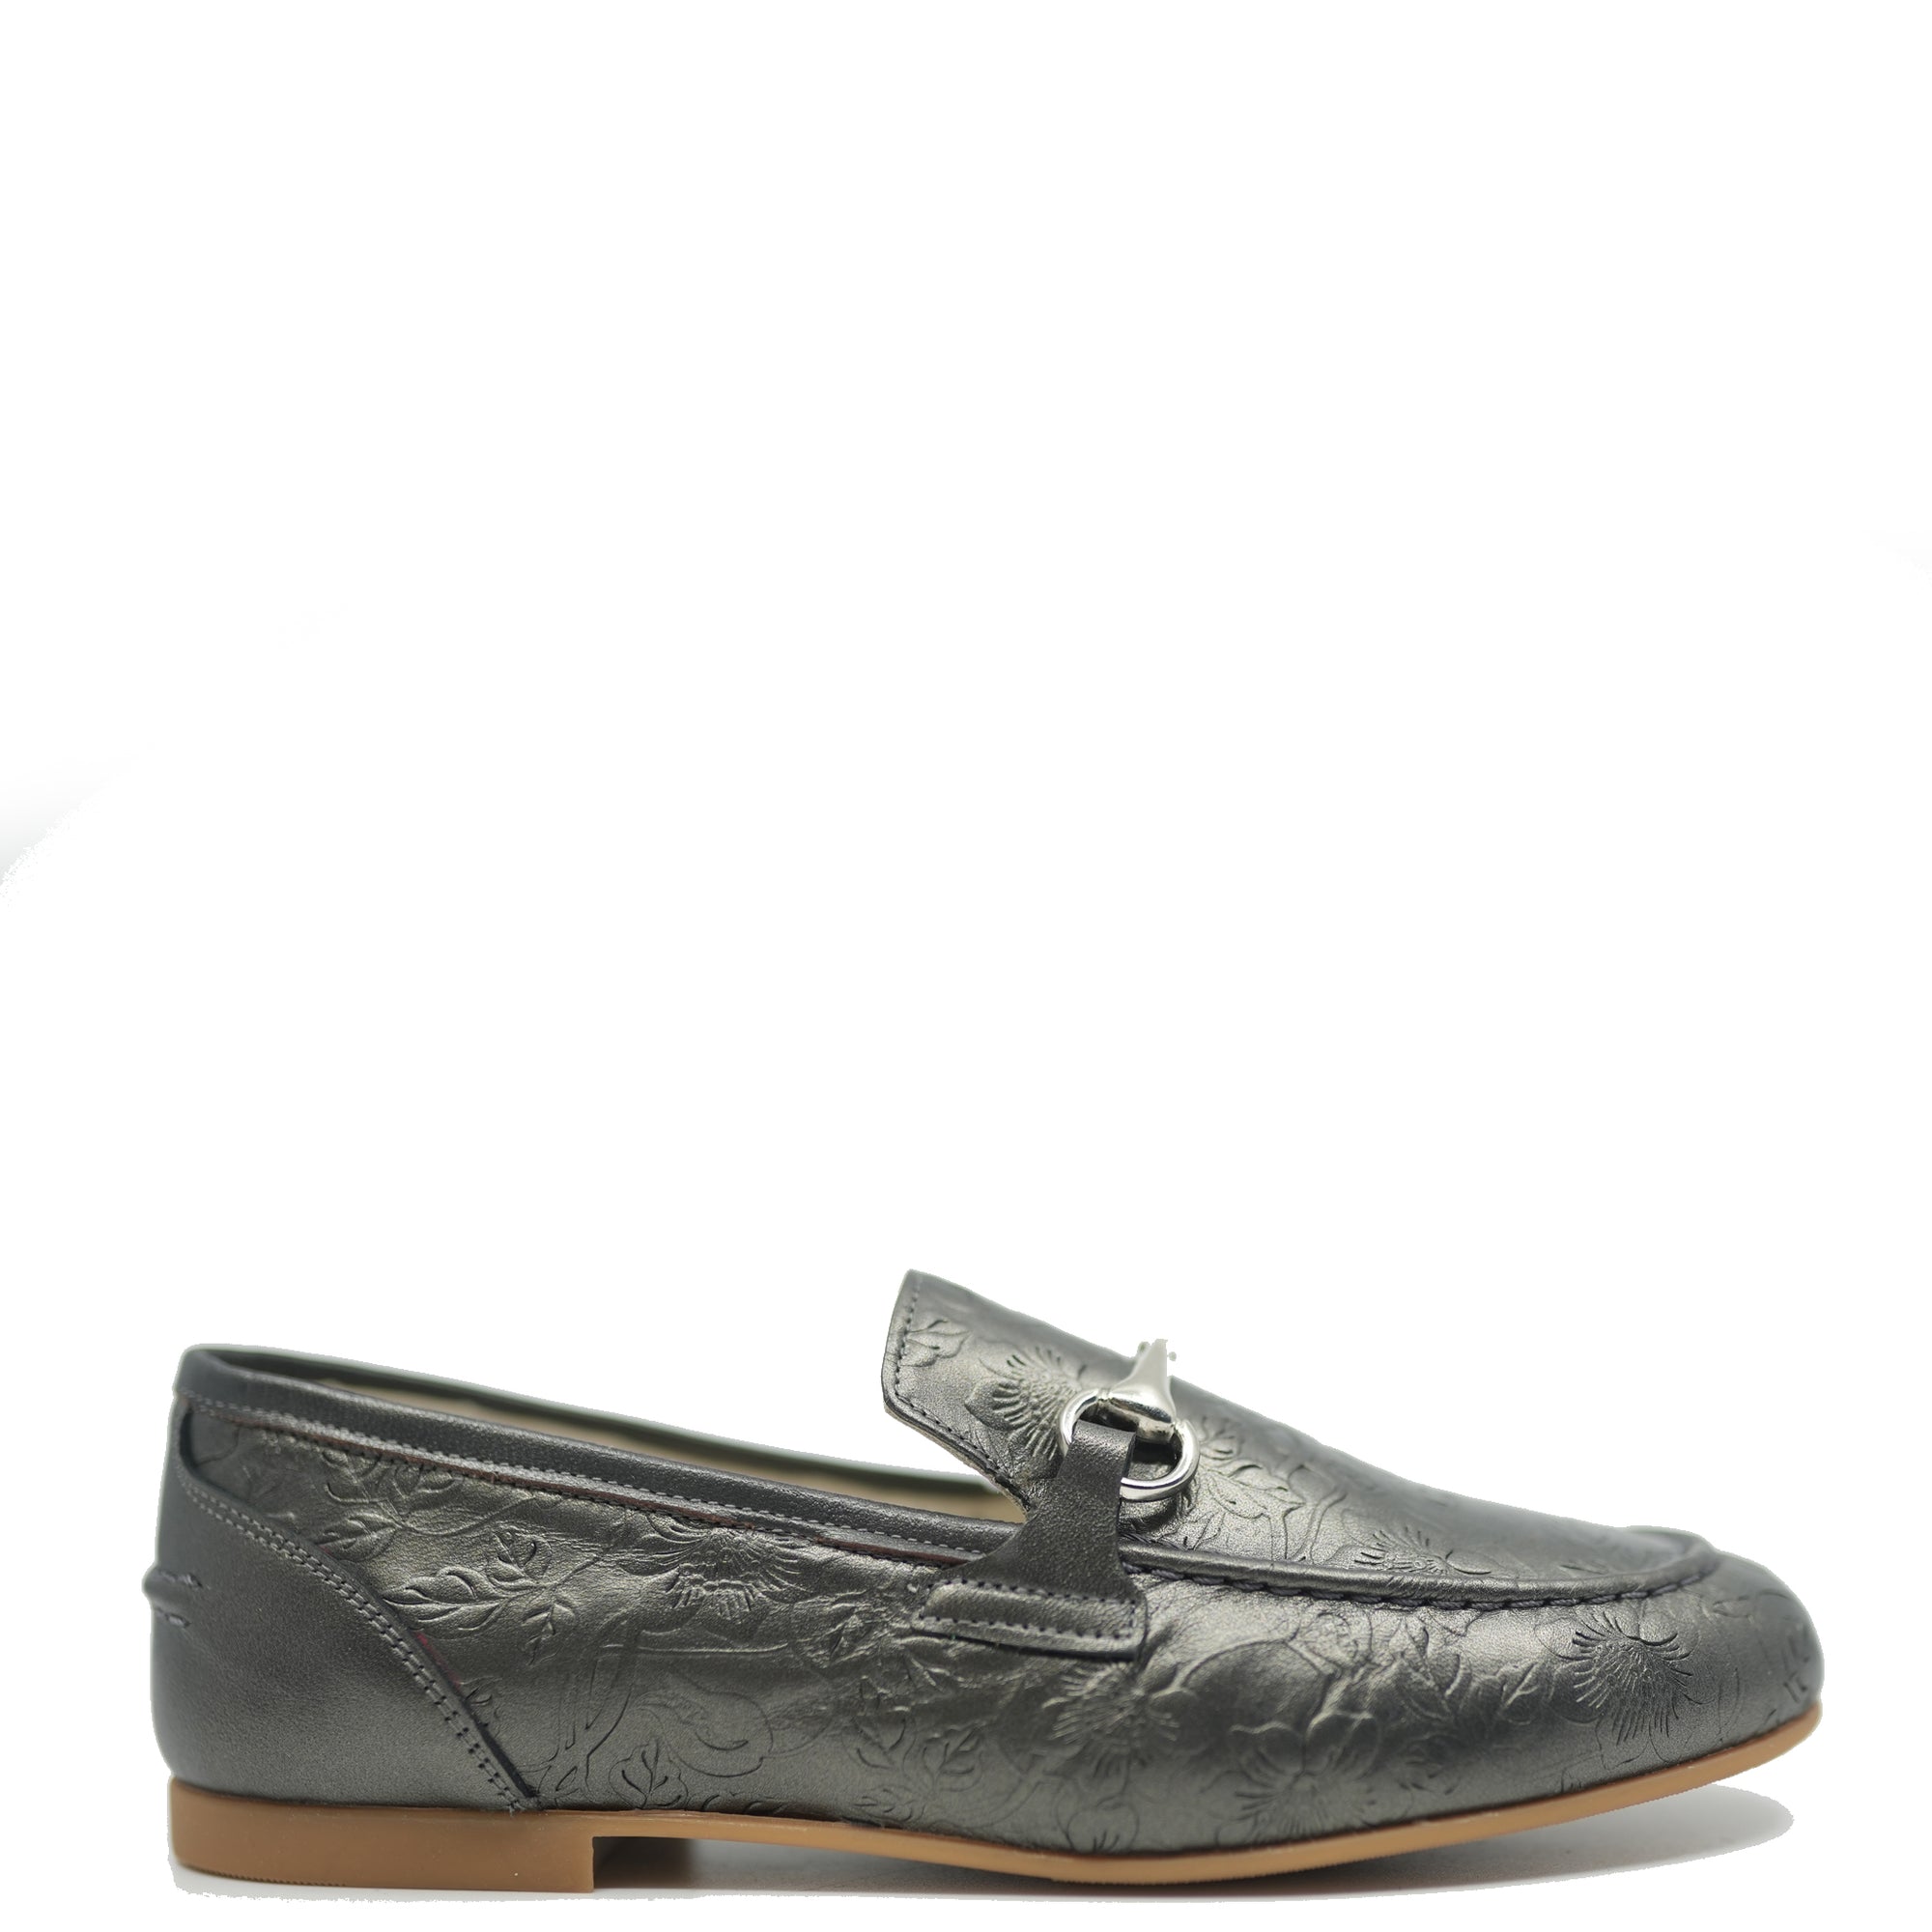 Confetti Pewter Stamped Buckle Loafer-Tassel Children Shoes